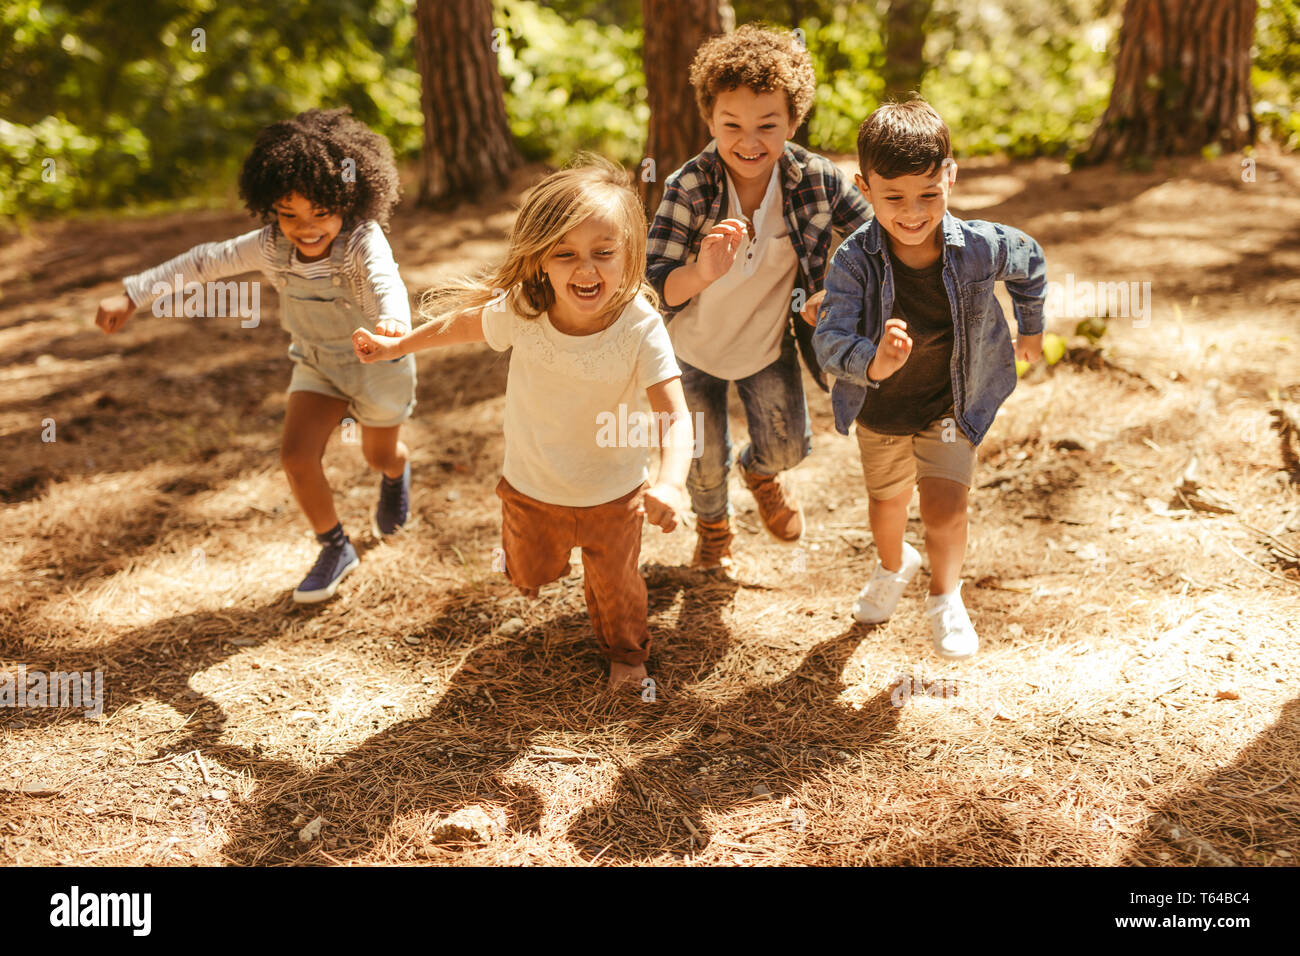 Group of kids running up in the forest. Multi-ethnic children playing together in forest. Stock Photo